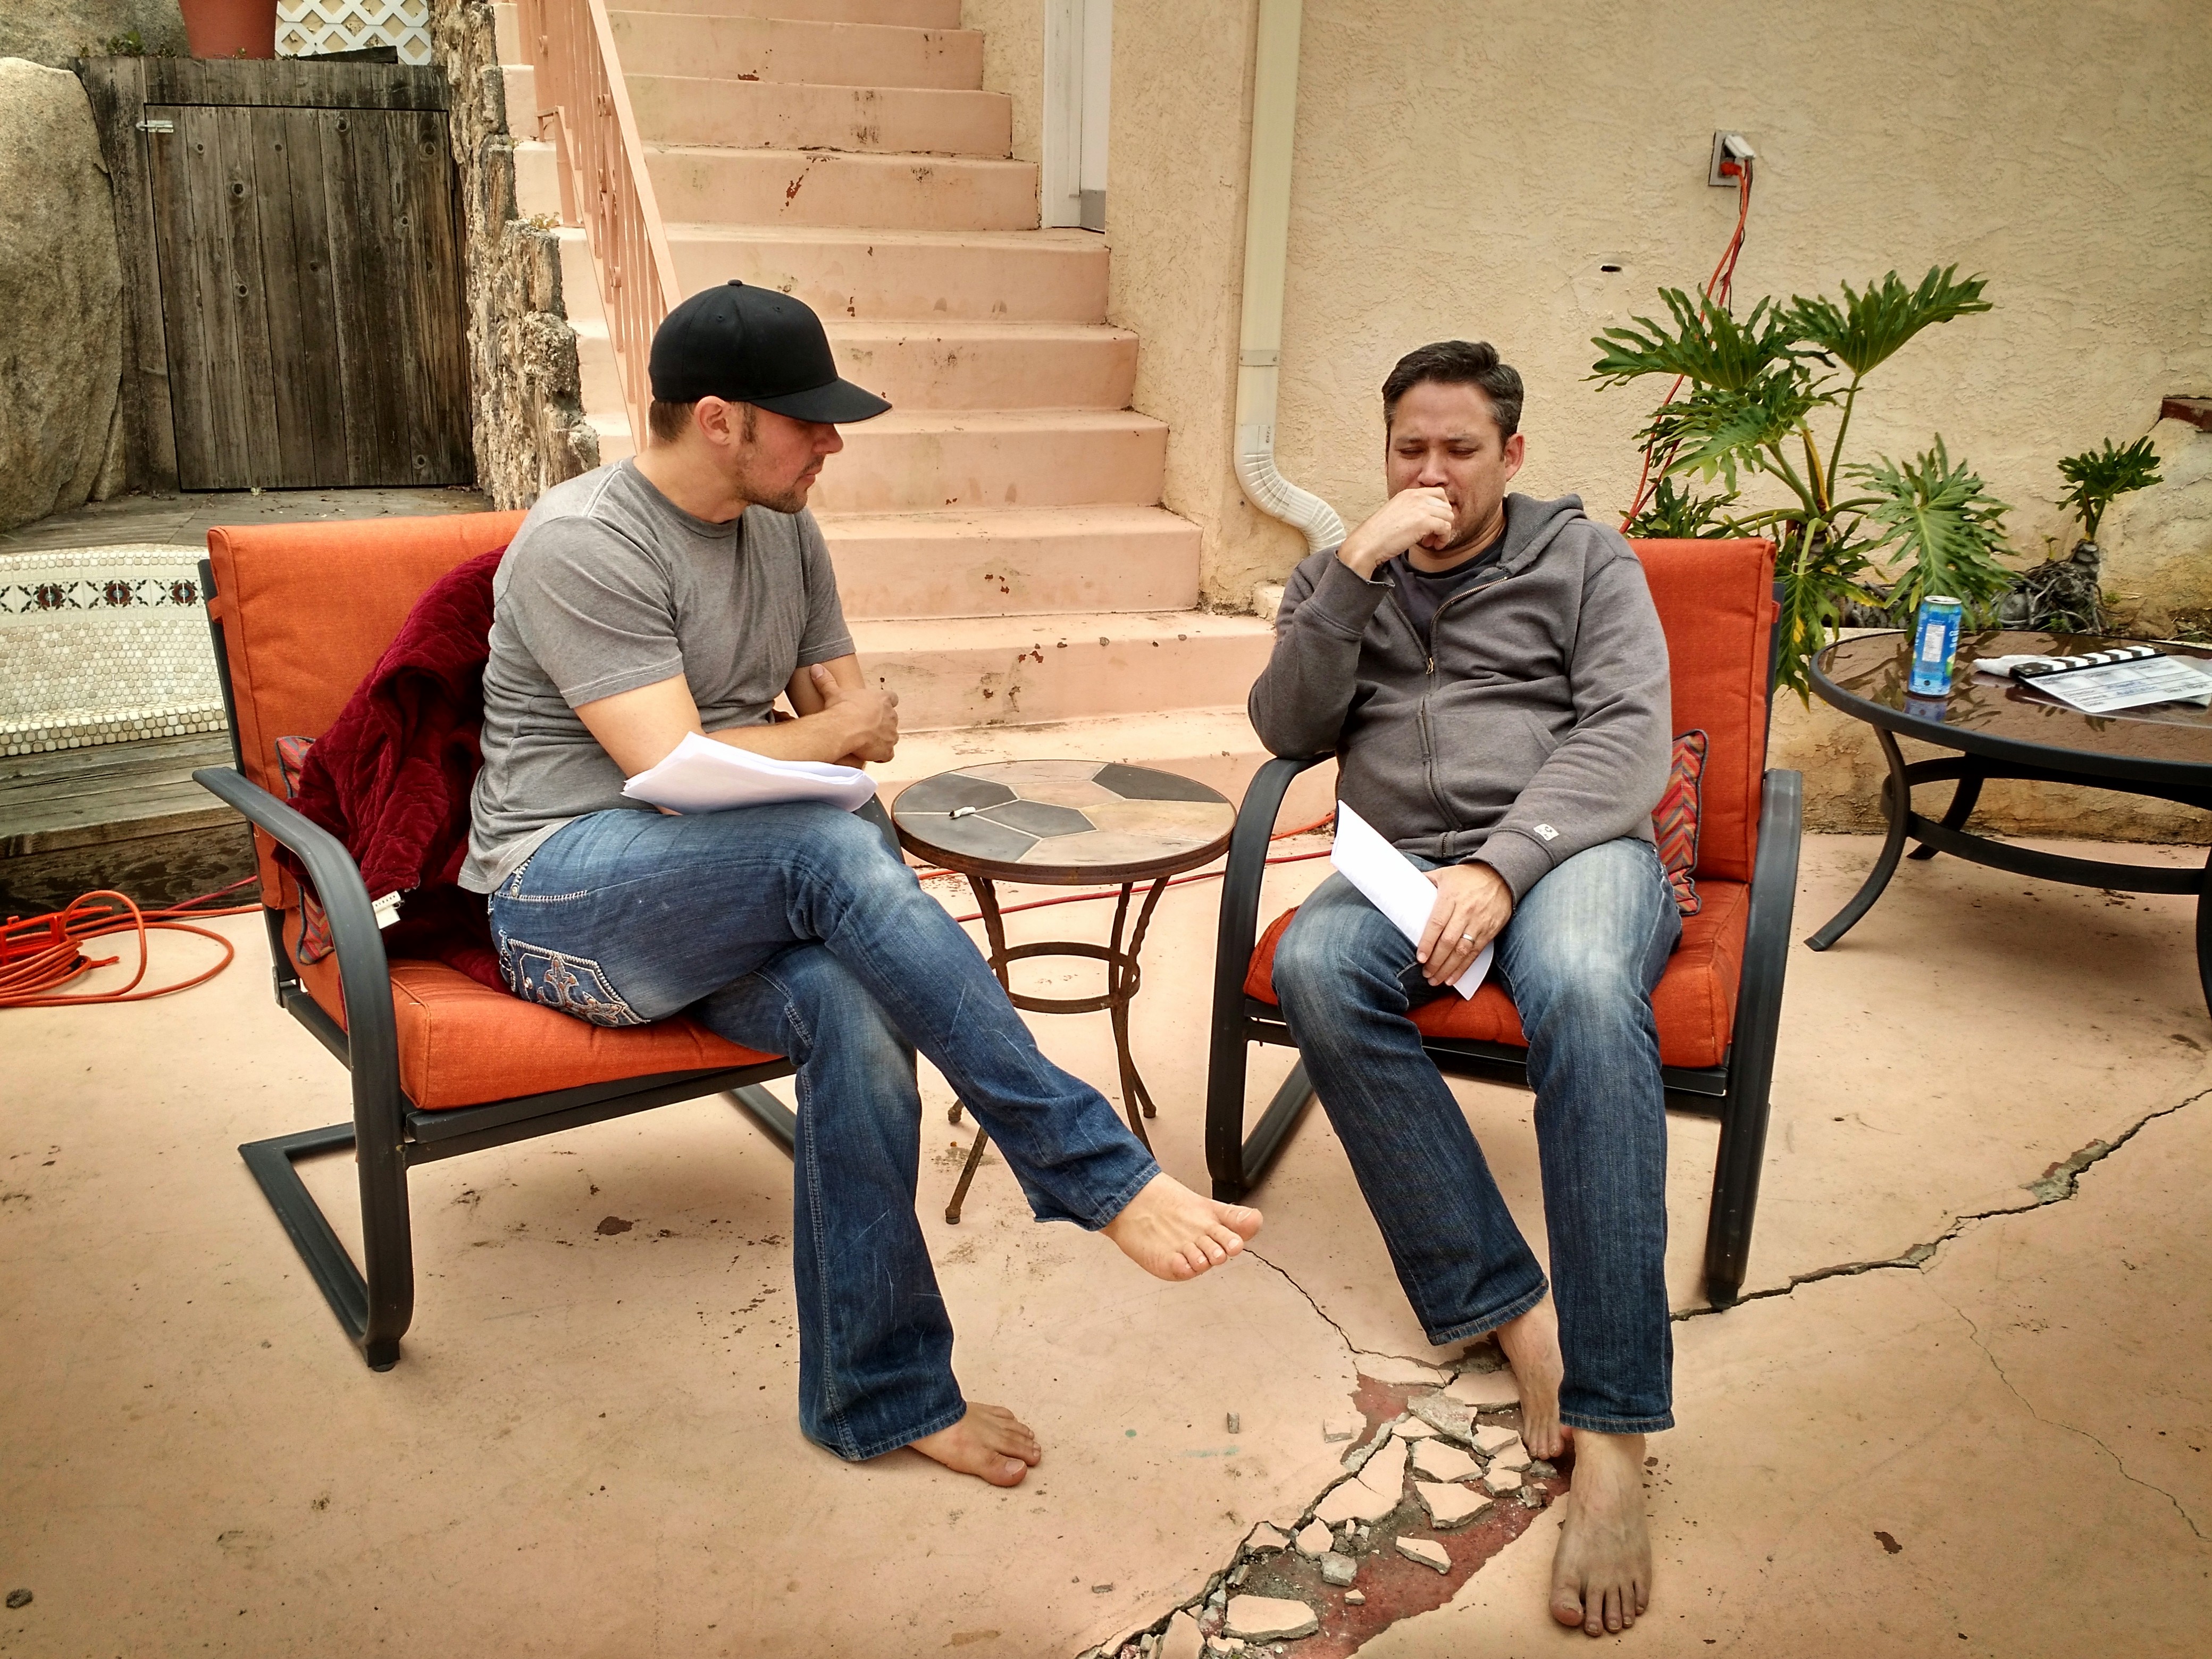 Working with actors... barefoot.